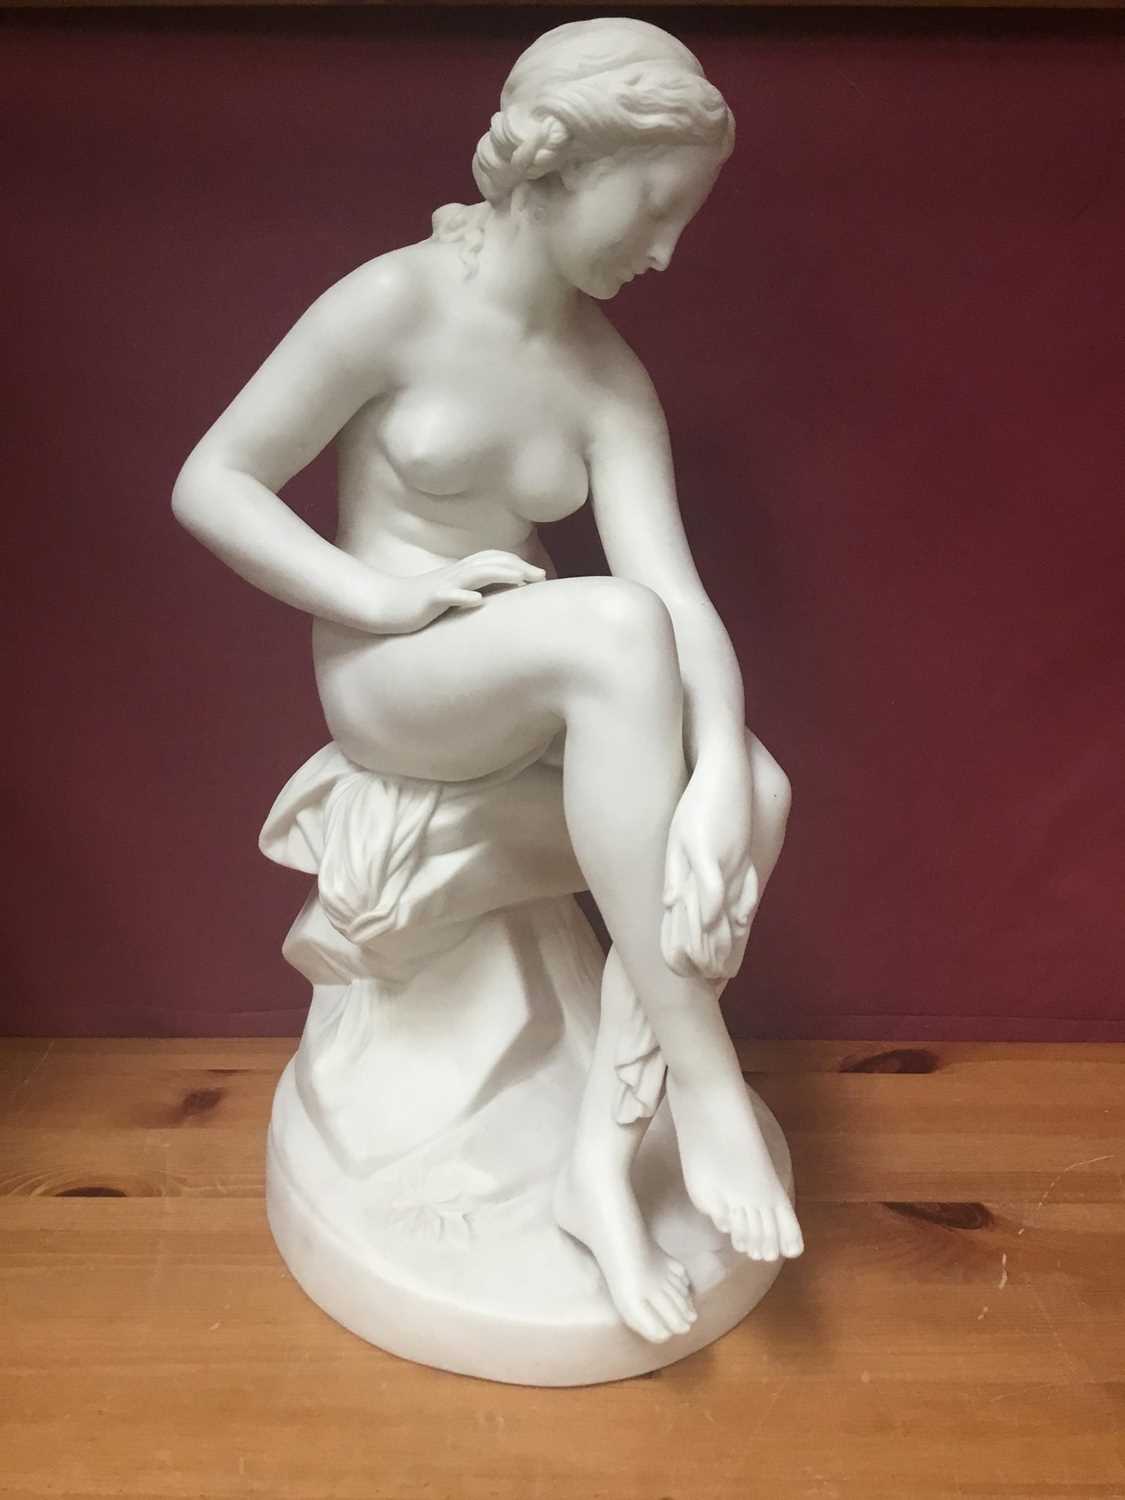 19th century Parian porcelain sculpture of seated female nude, approximately 38cm.